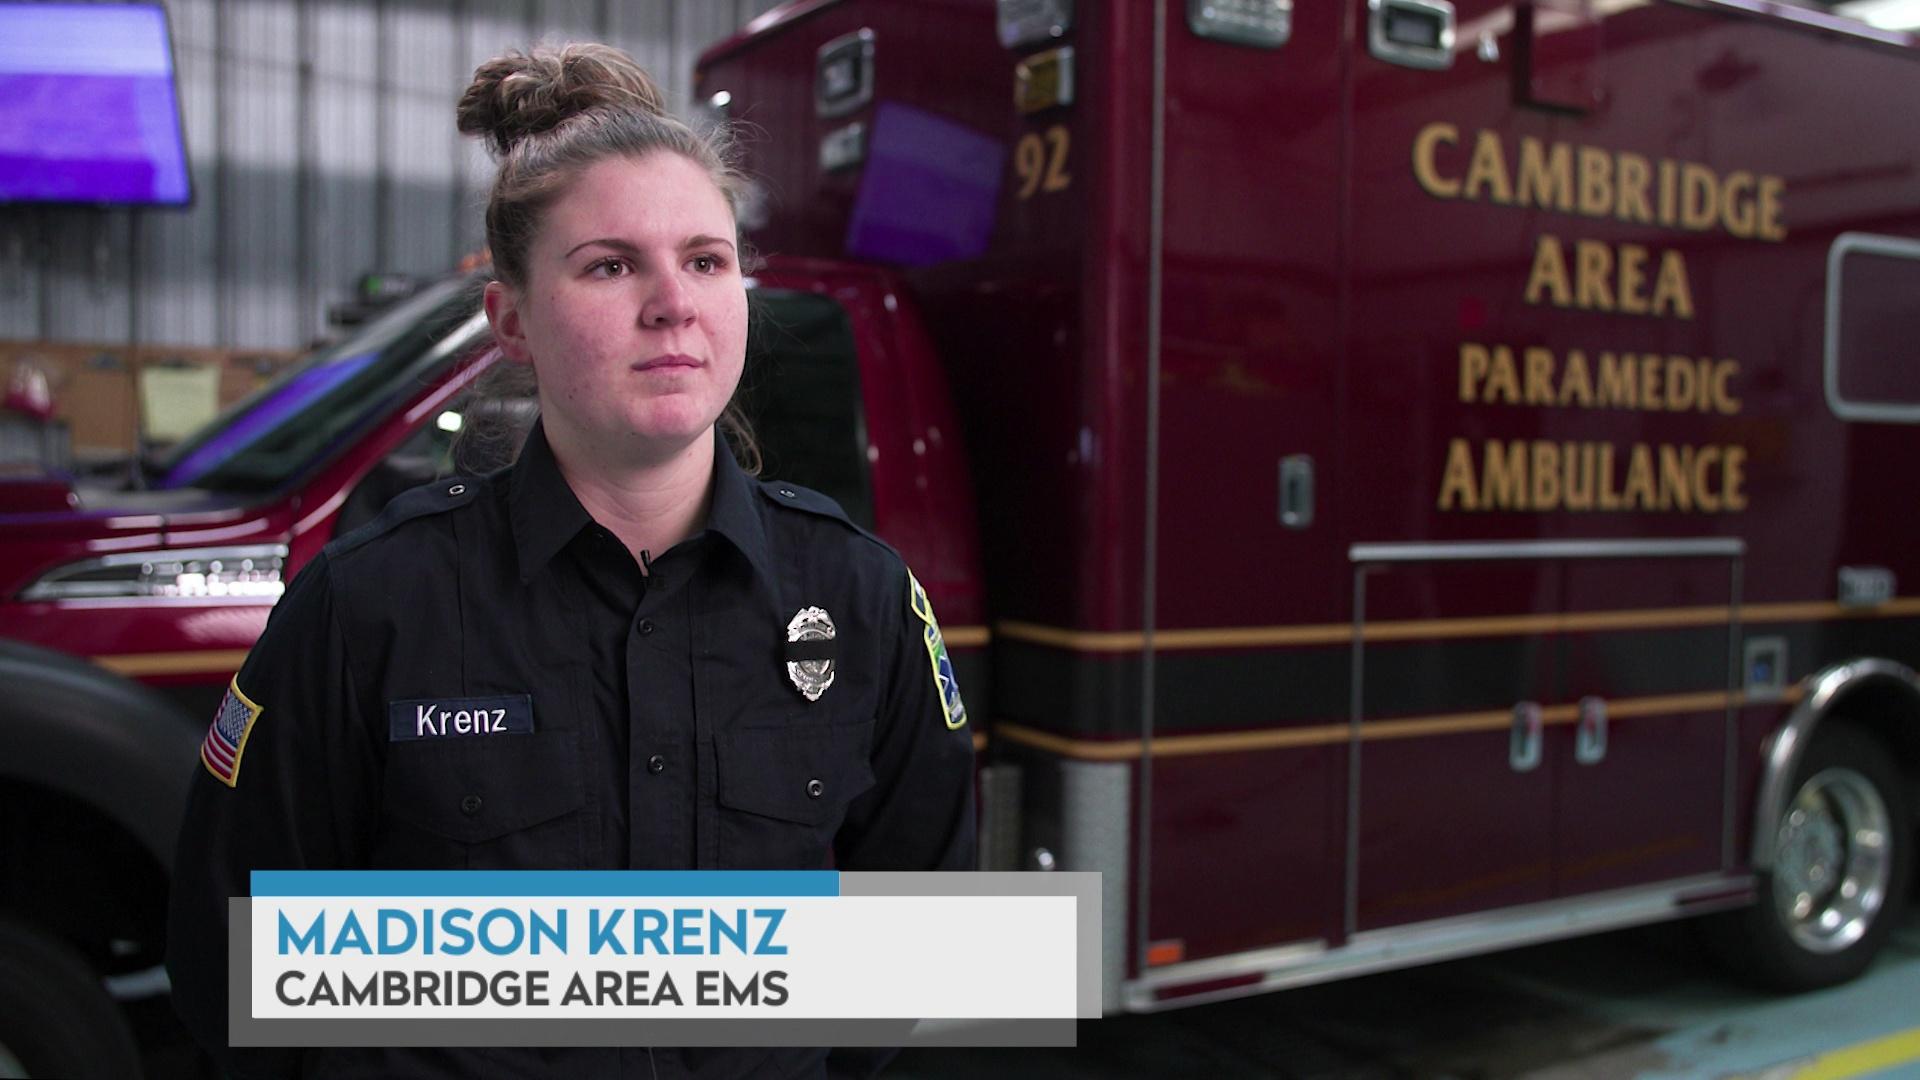 Madison Krenz on the stresses of working in the EMS system